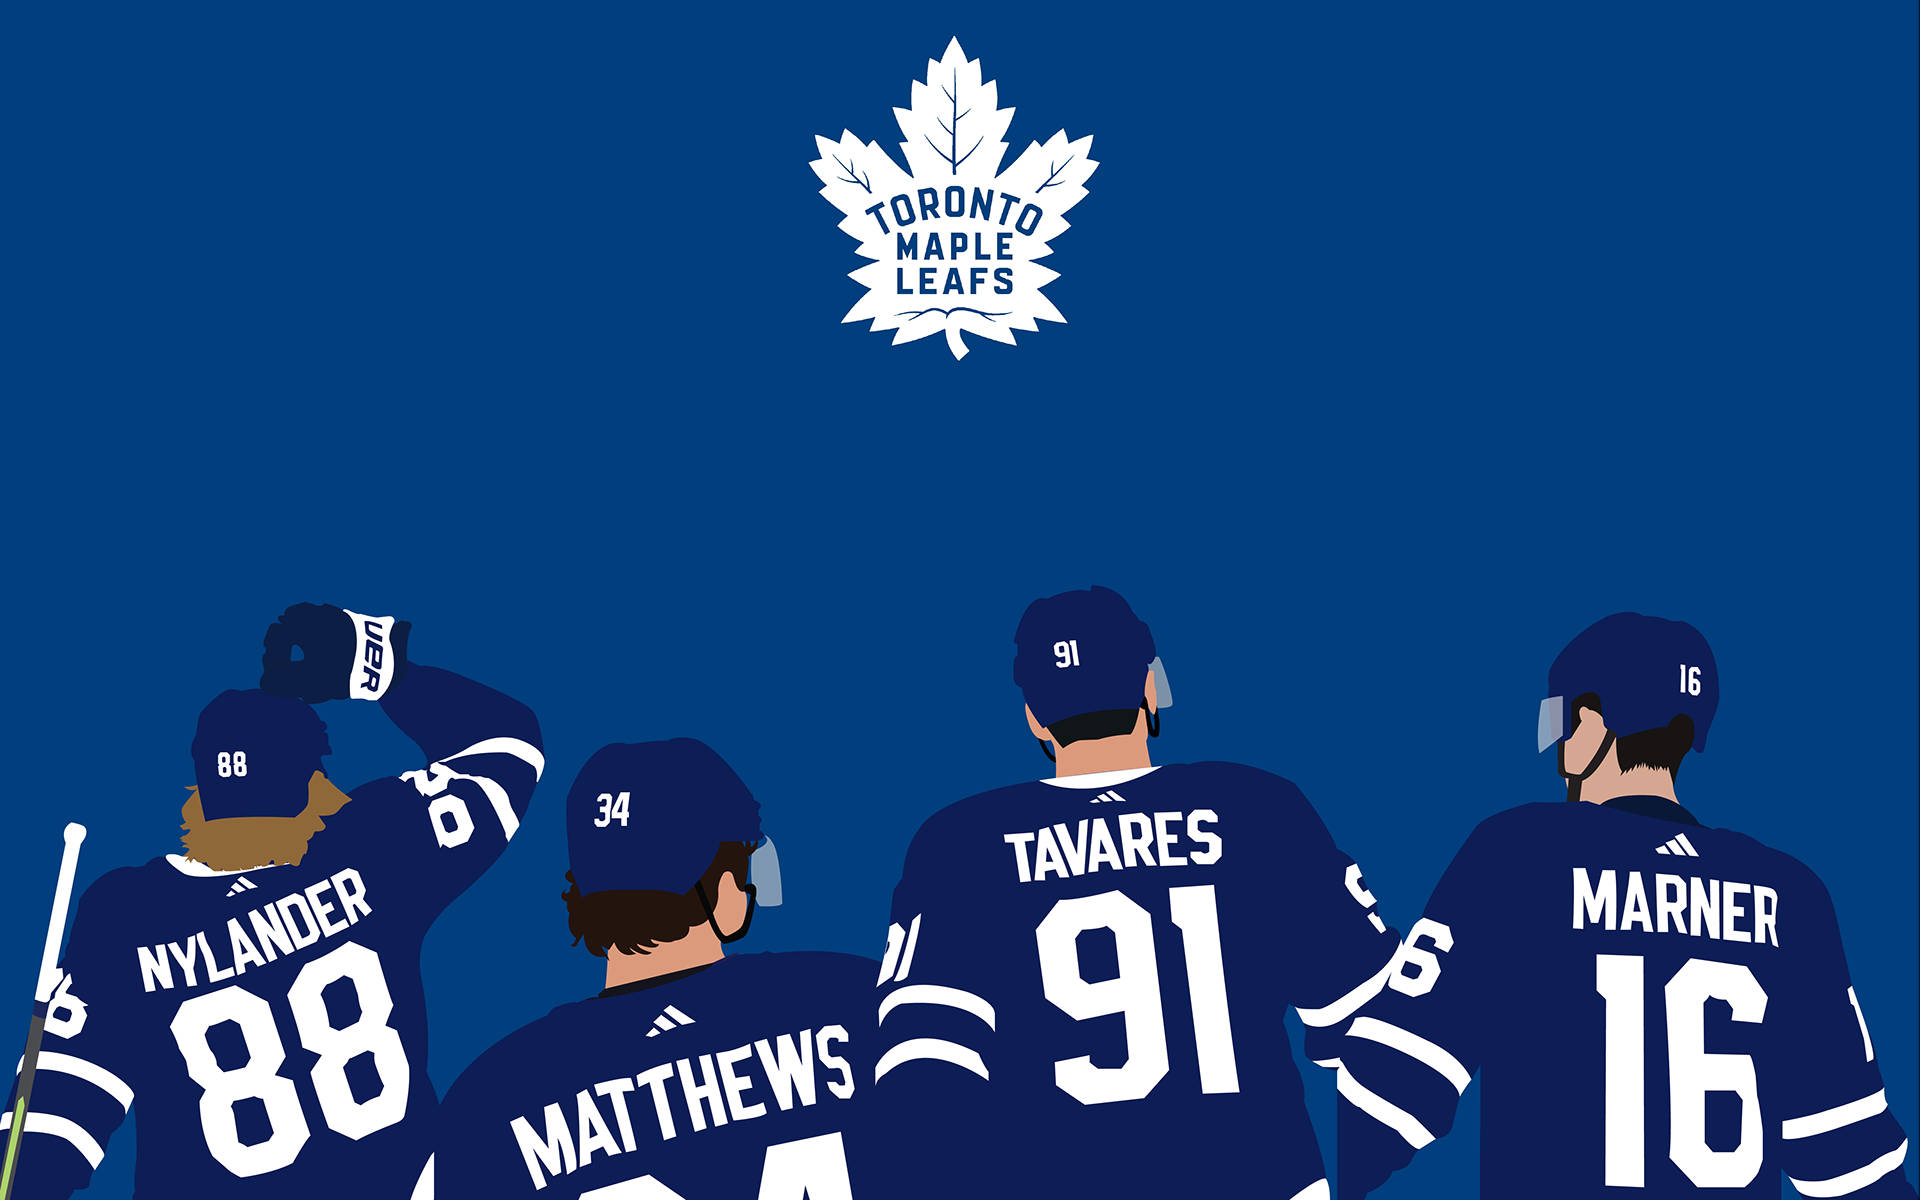 Toronto Maple Leafs Players Vector Art Background